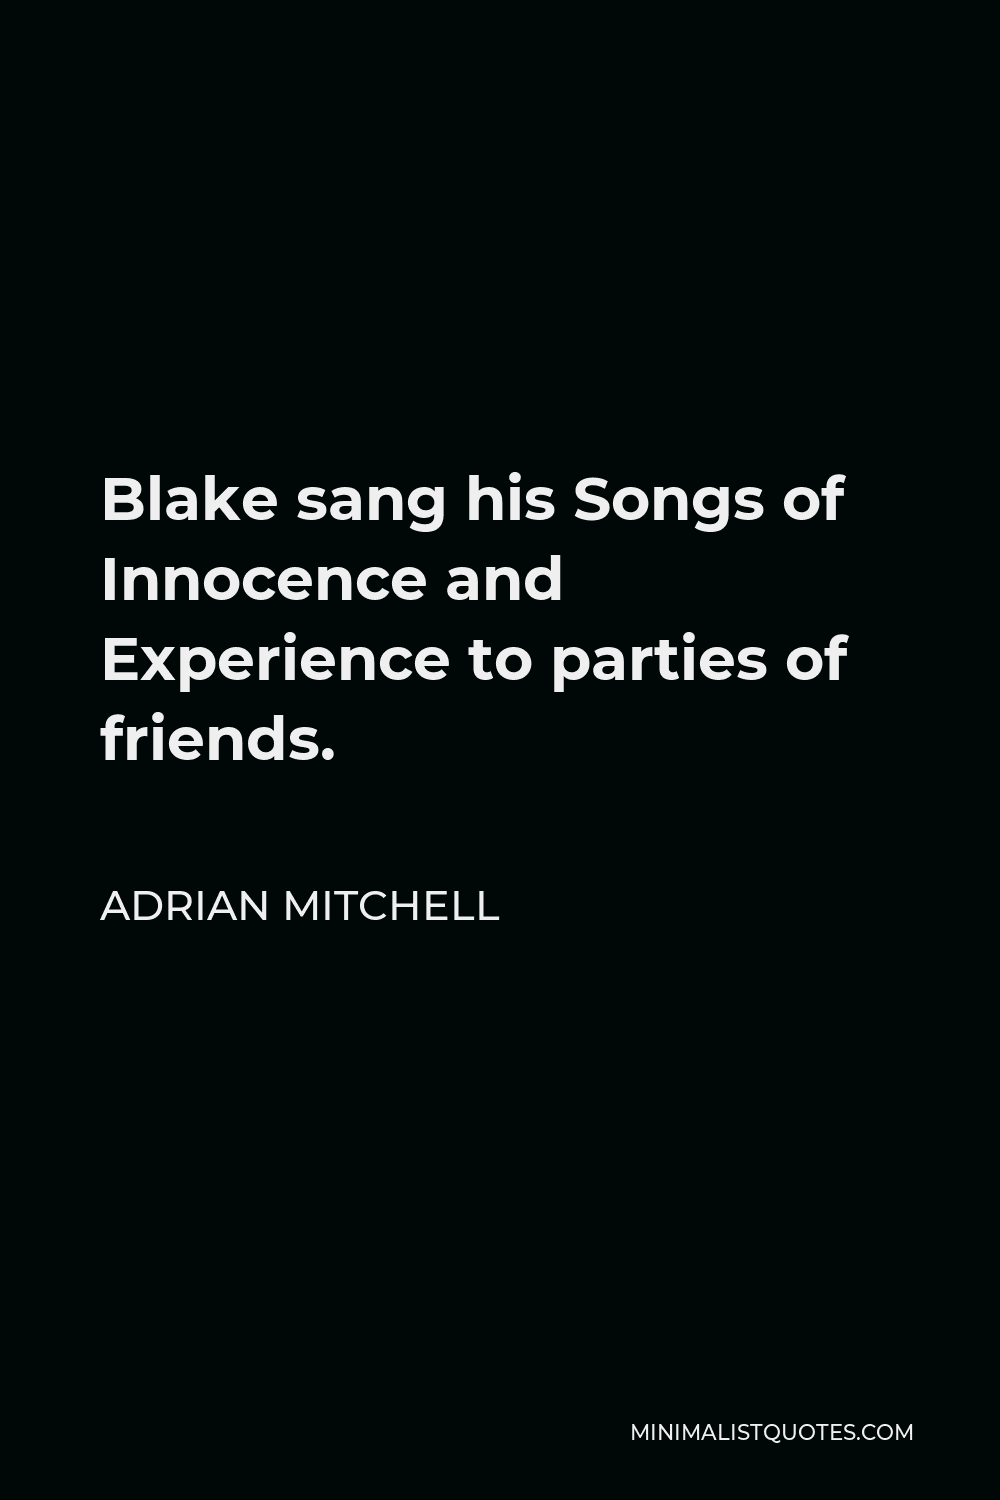 Adrian Mitchell Quote - Blake sang his Songs of Innocence and Experience to parties of friends.